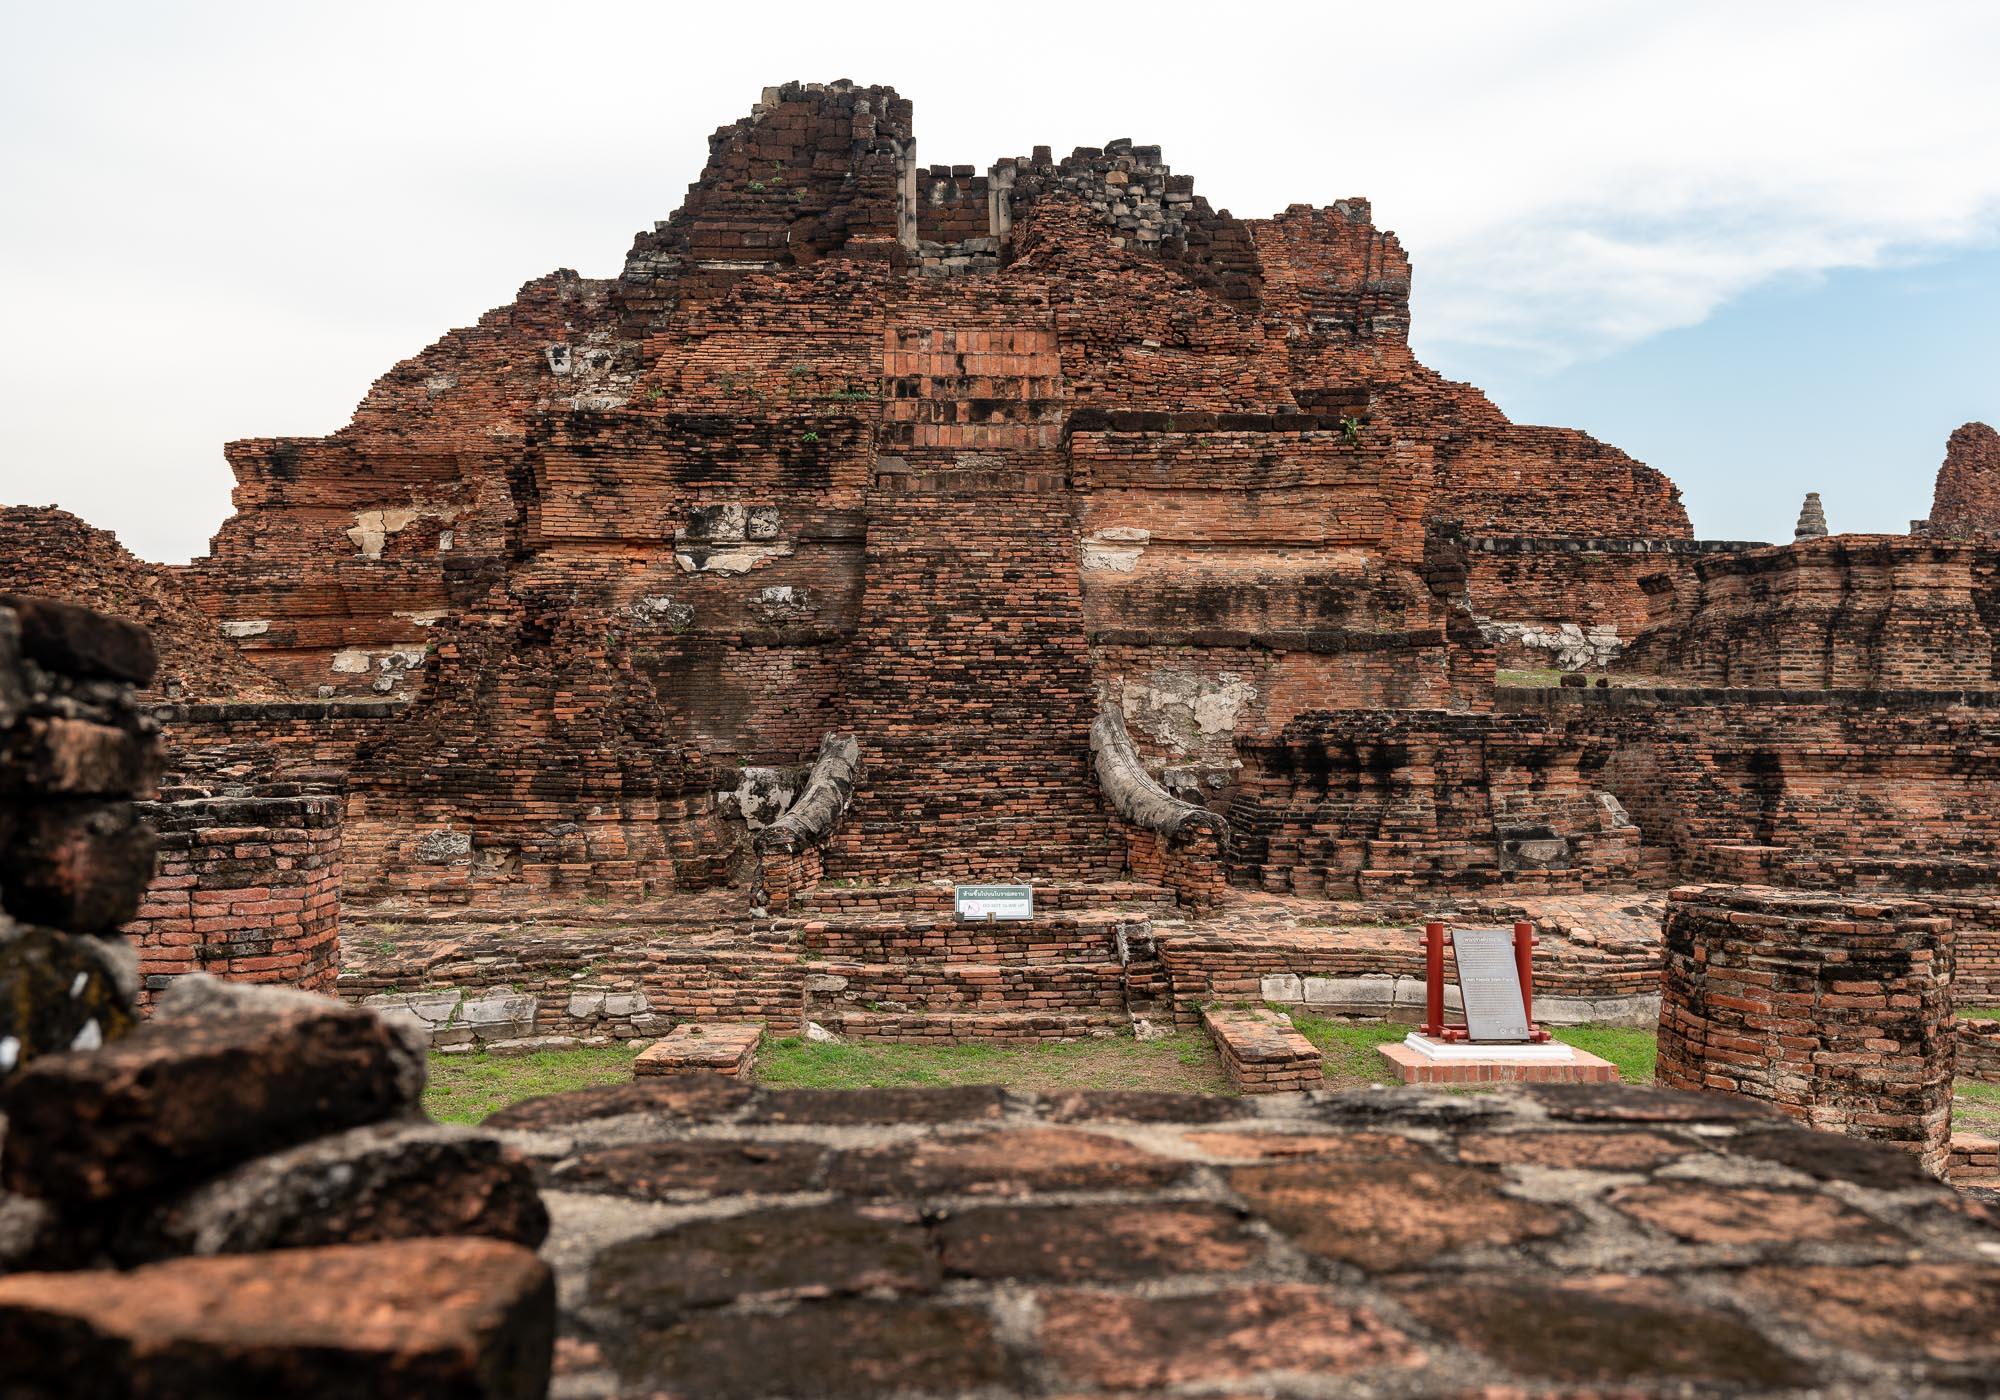 Wat Mahathat's main stupa has been only partially restored and is nowhere near its original height of about 50 metres. – © Michael Turtle